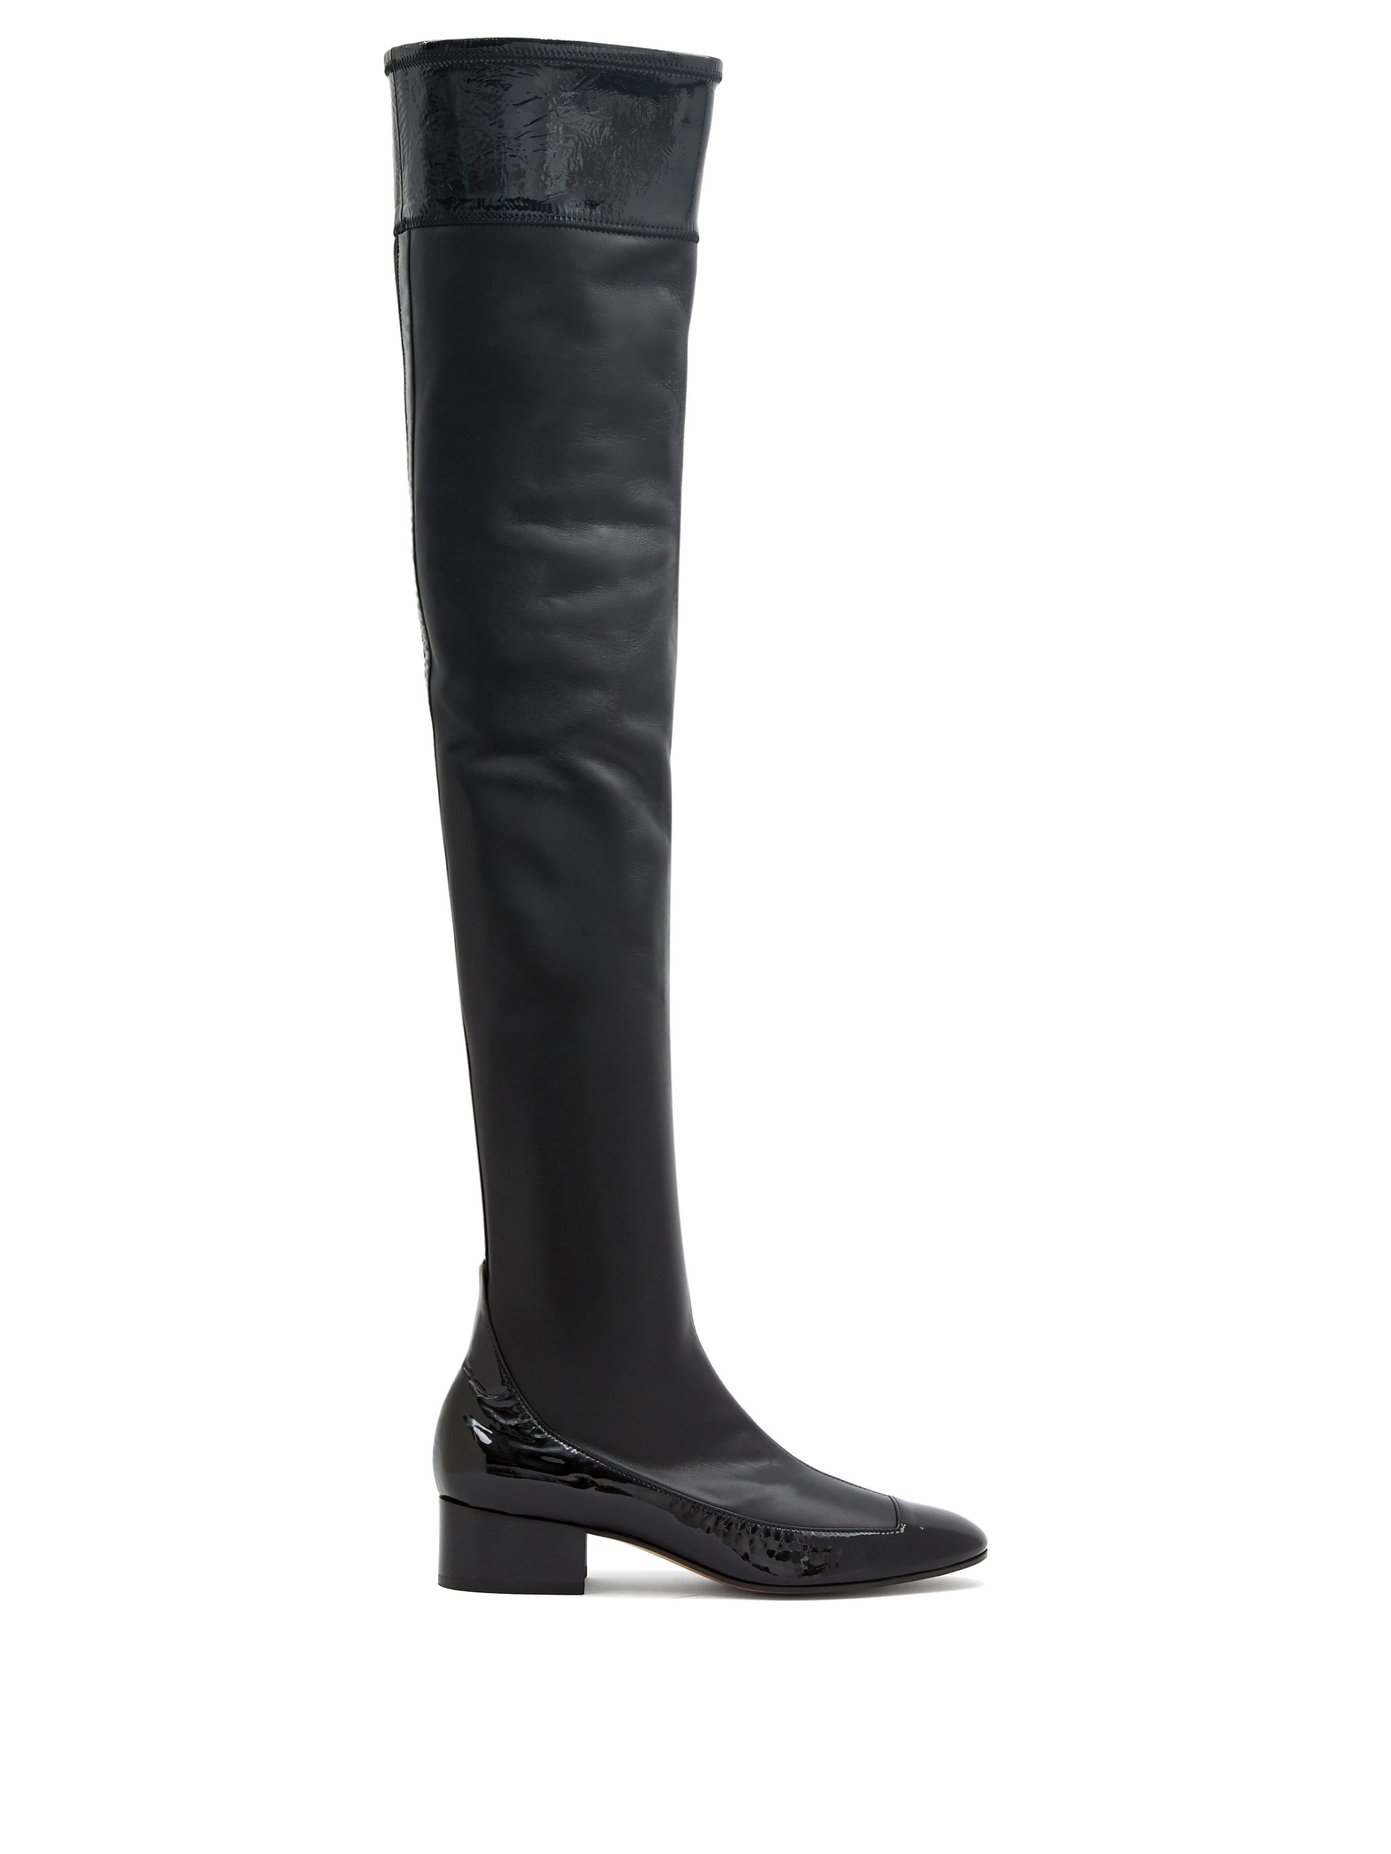 boots over knee leather